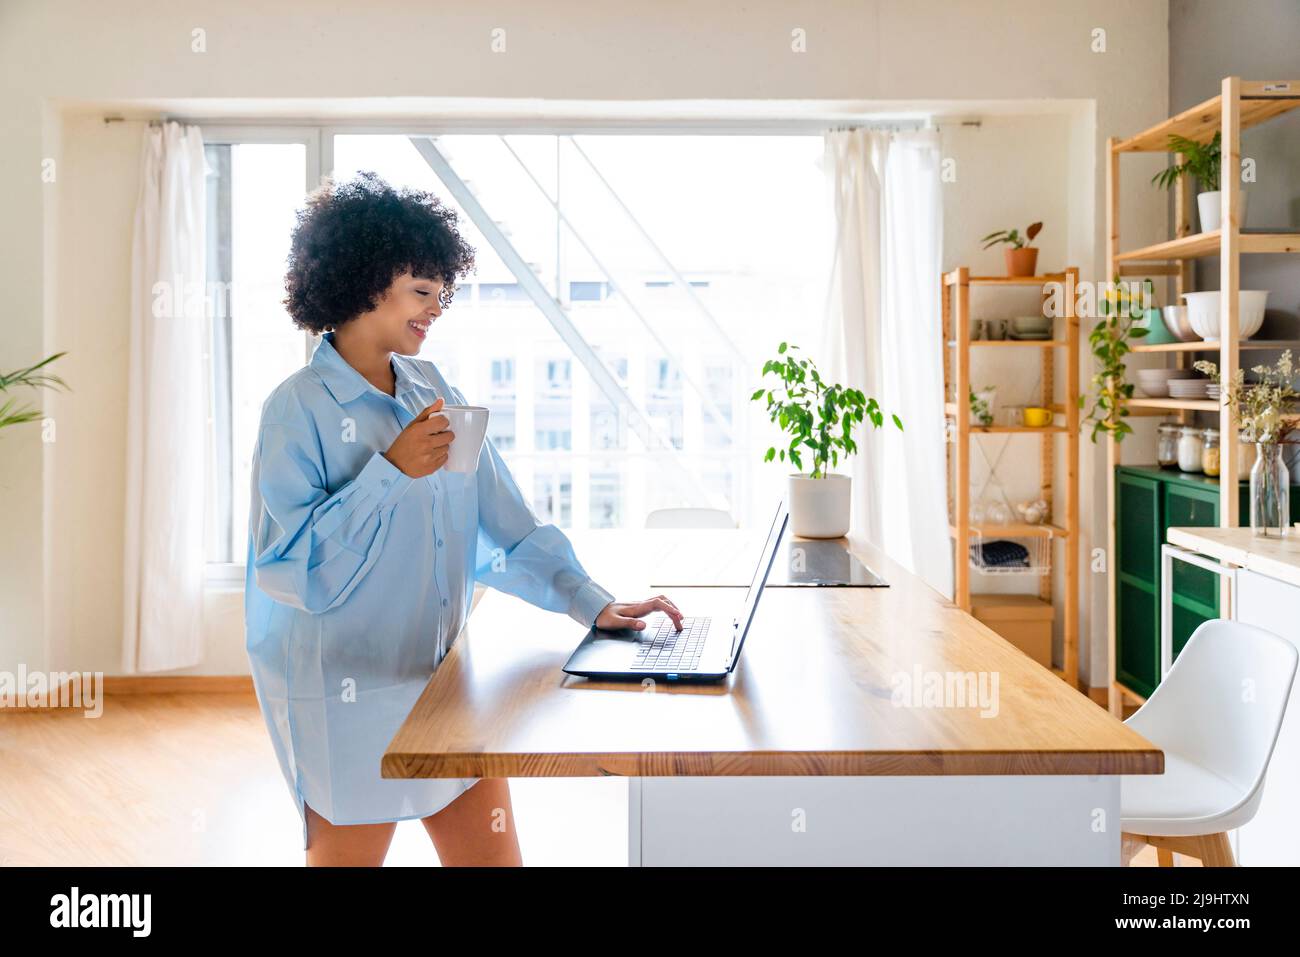 Happy woman with coffee cup using laptop at kitchen island Stock Photo